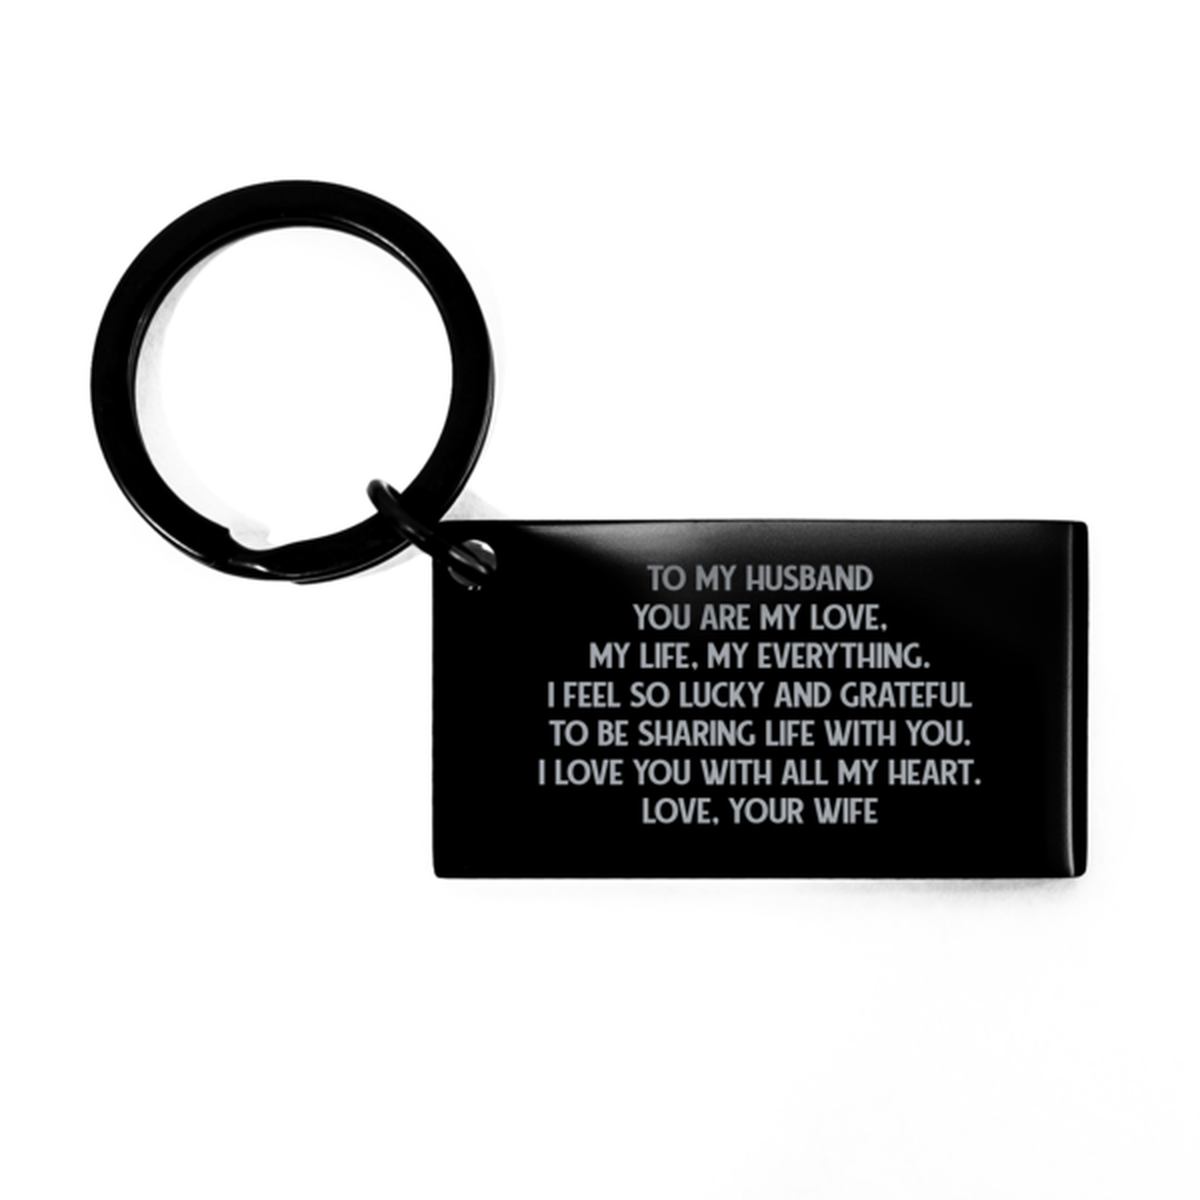 To My Husband Black Keychain, I Love You With All My Heart, Anniversary Gifts For Husband From Wife, Birthday Gifts For Men